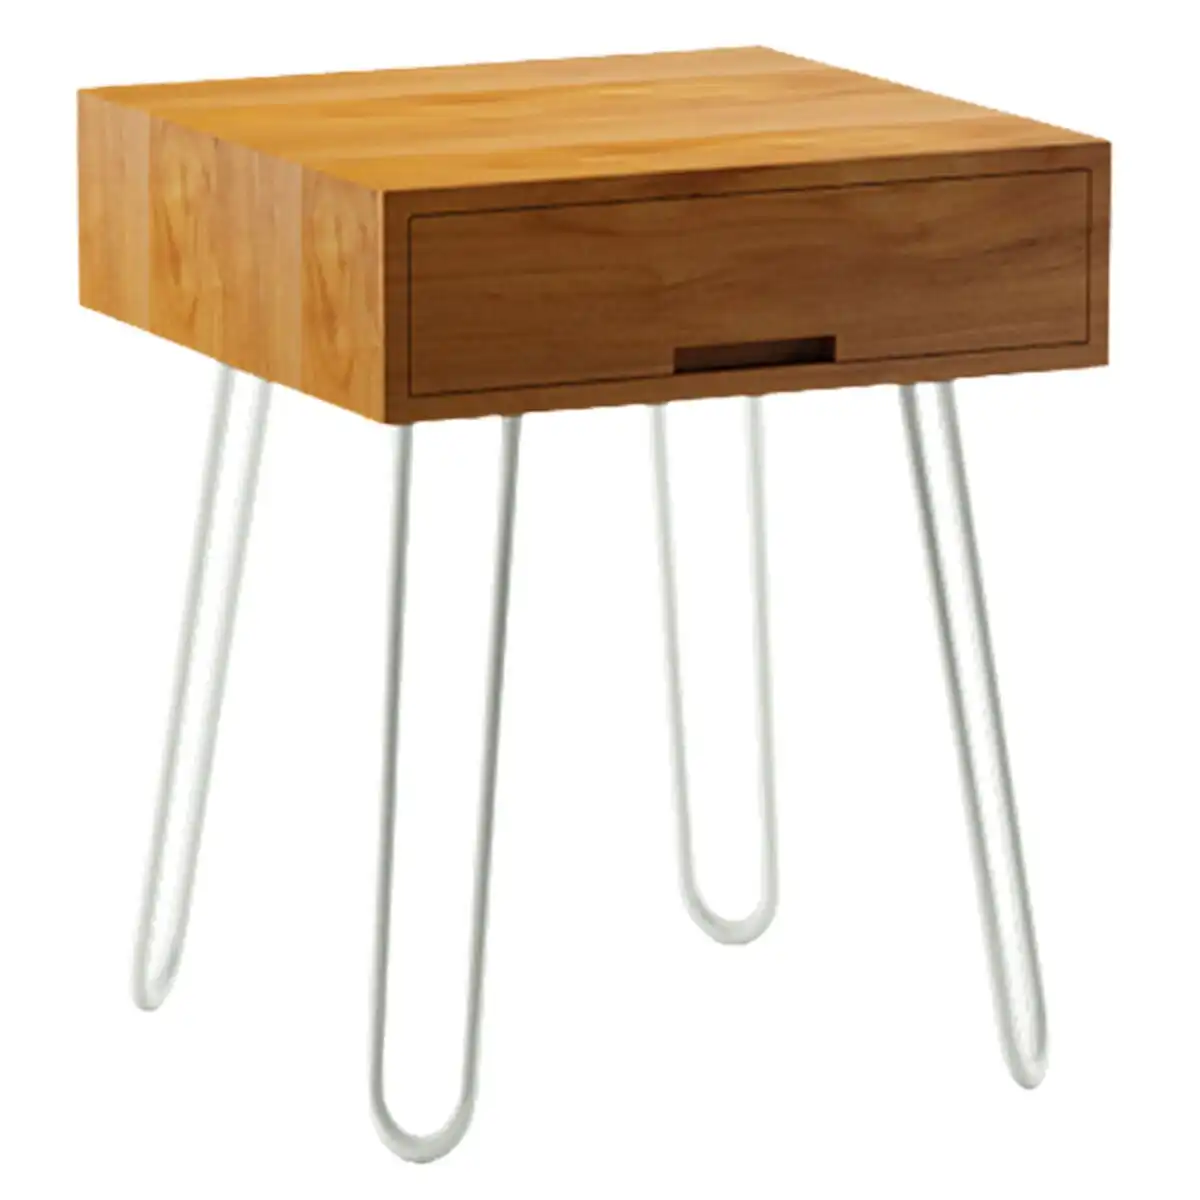 Reddie Willy Square Bedside Table Natural Teak Top White Base